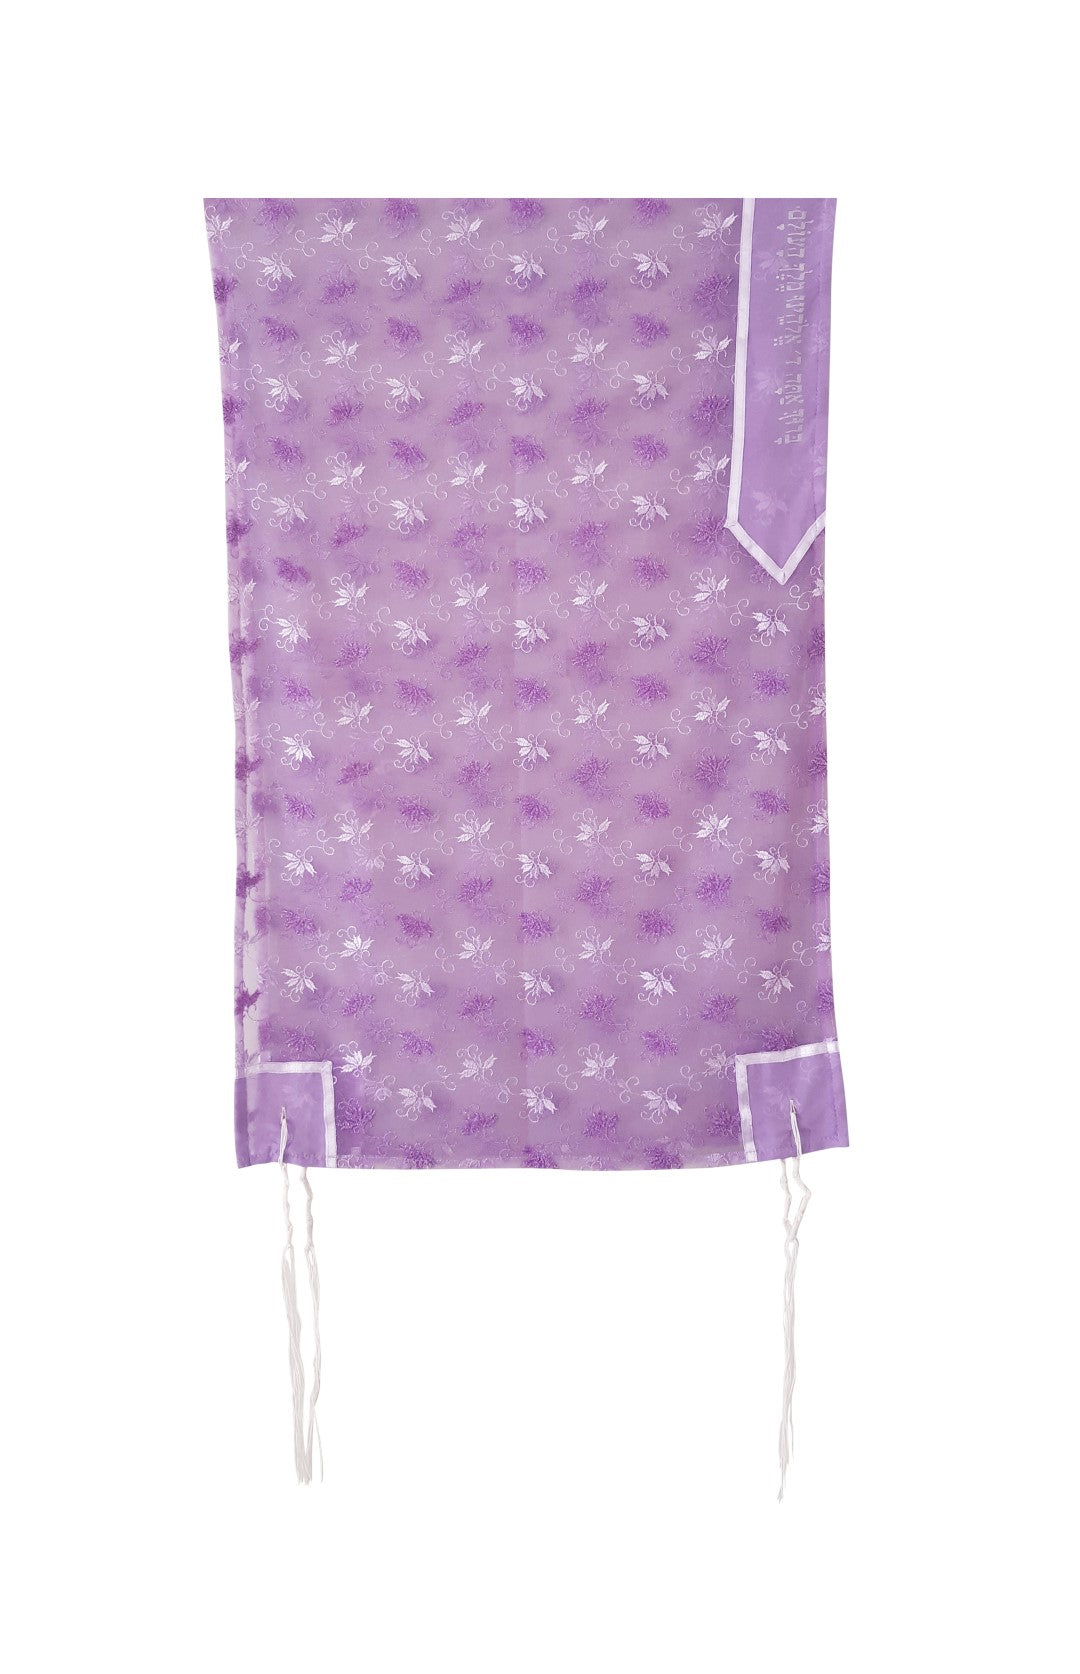 Delicate Lilac Floral Embroidery Tallit for women, Bat Mitzvah Tallit hung, Tallit for Girl, Tzitzit